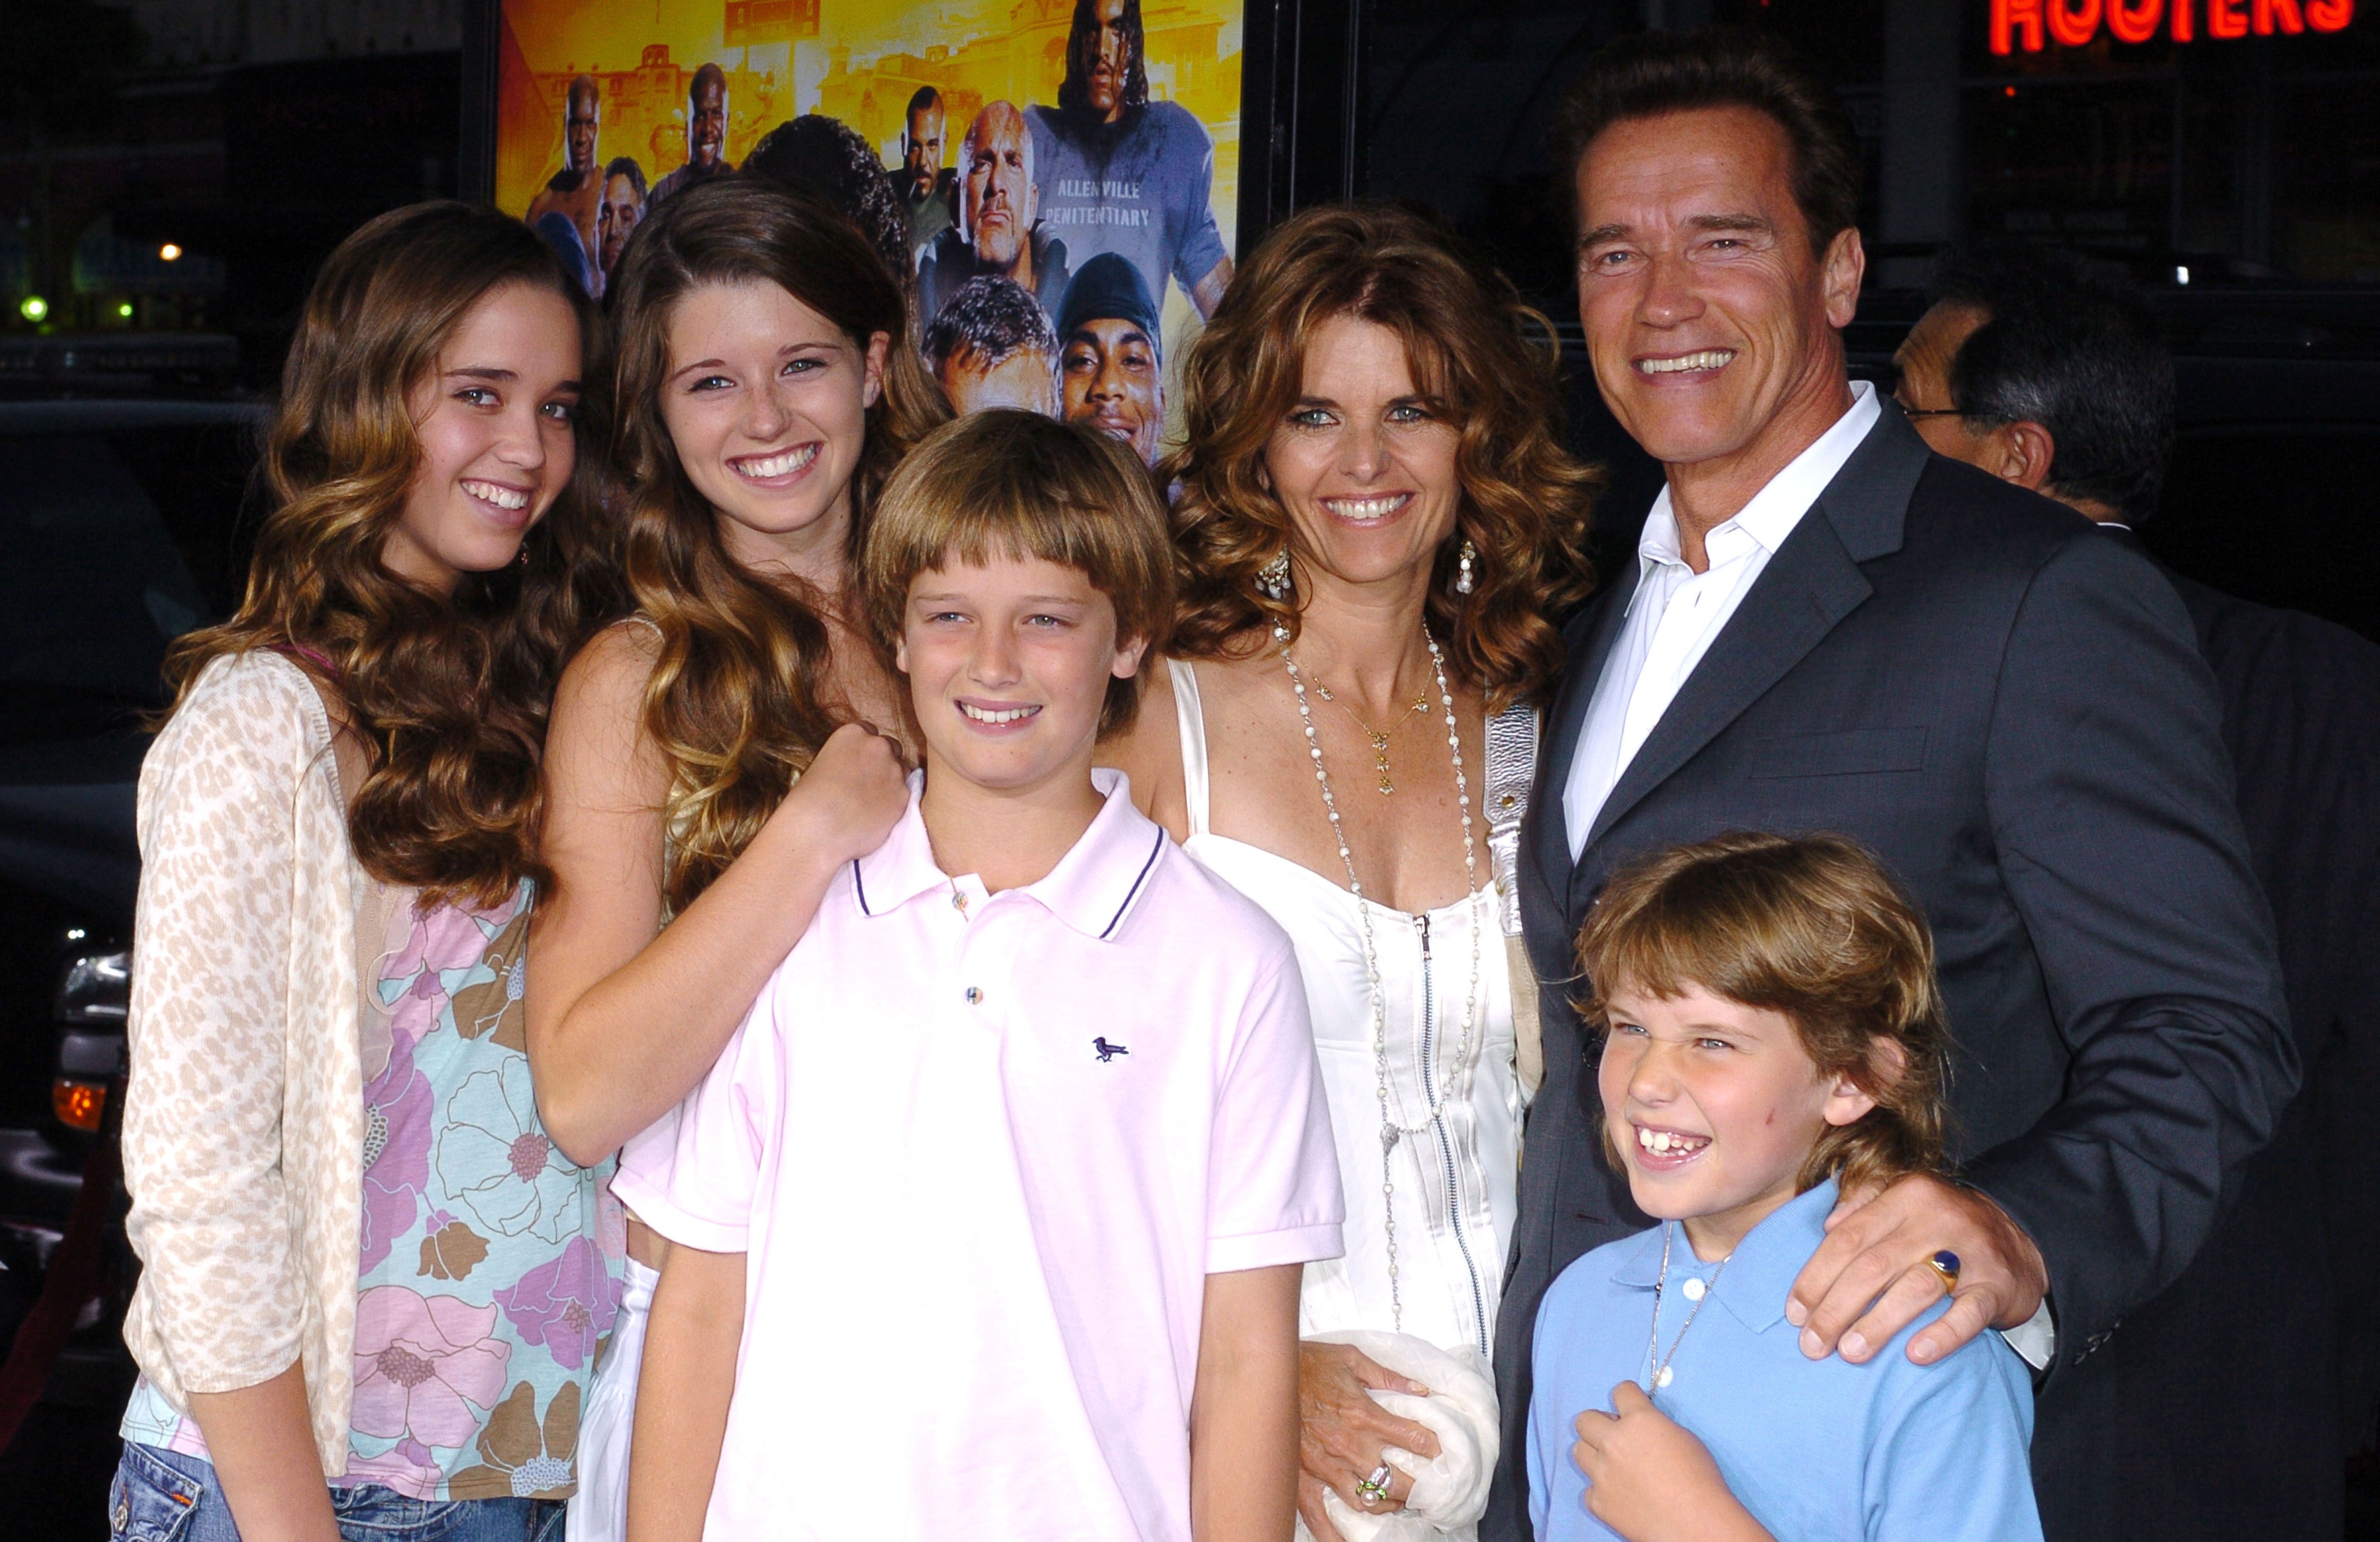 Arnold Schwarzenegger, Maria Shriver and family arrive at "The Longest Yard" Los Angeles Premiere on May 19, 2005 | Source: Getty Images 